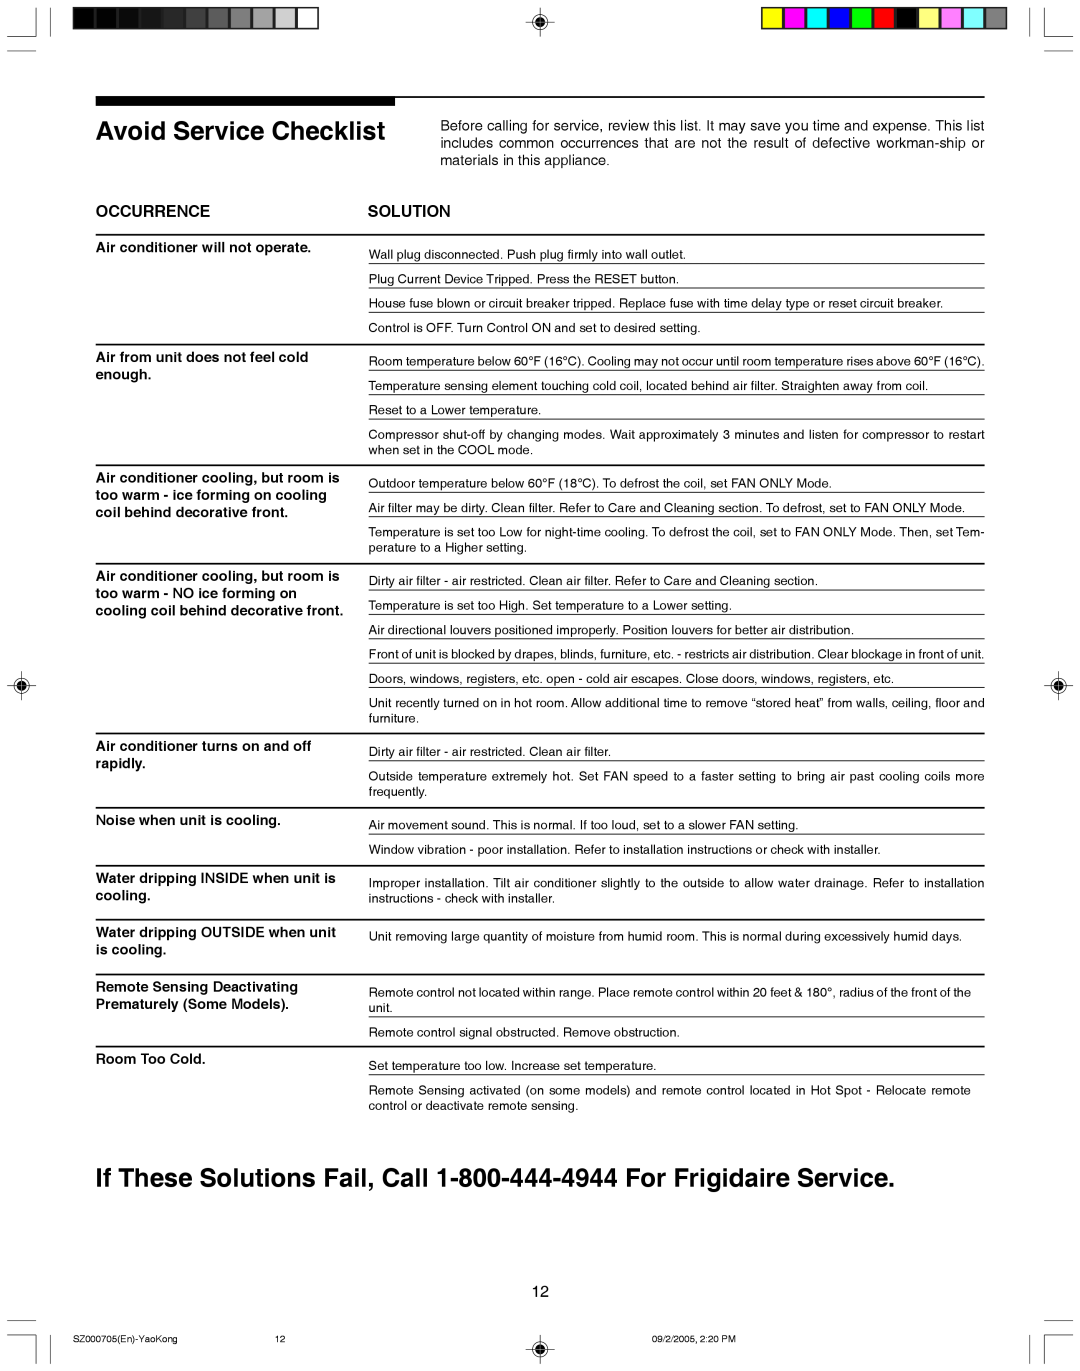 Frigidaire 220218A028 manual Avoid Service Checklist, If These Solutions Fail, Call 1-800-444-4944 For Frigidaire Service 